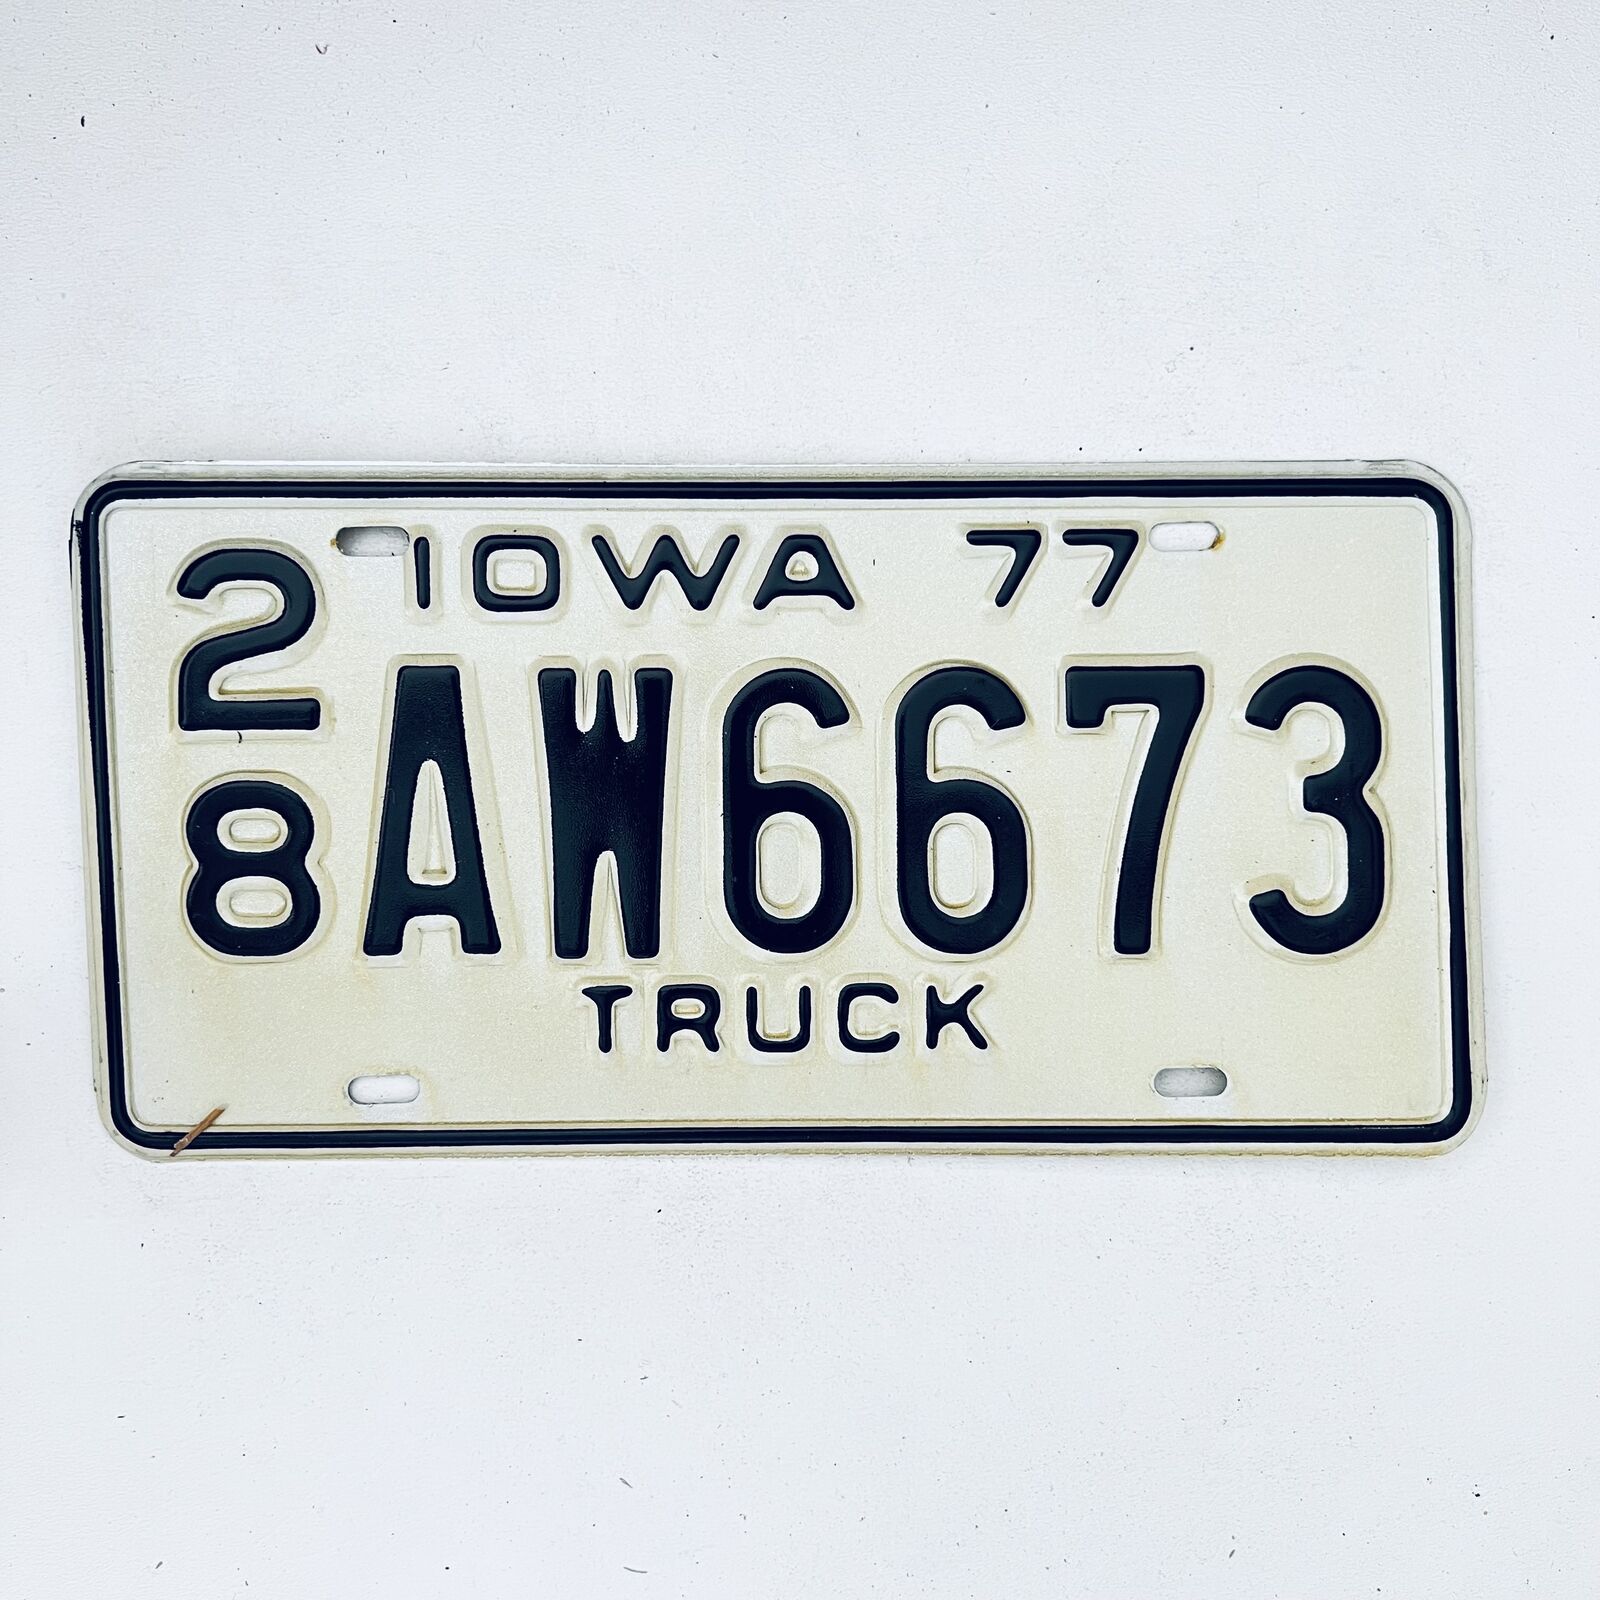 1977 United States Iowa Delaware County Passenger License Plate 28 AW6673